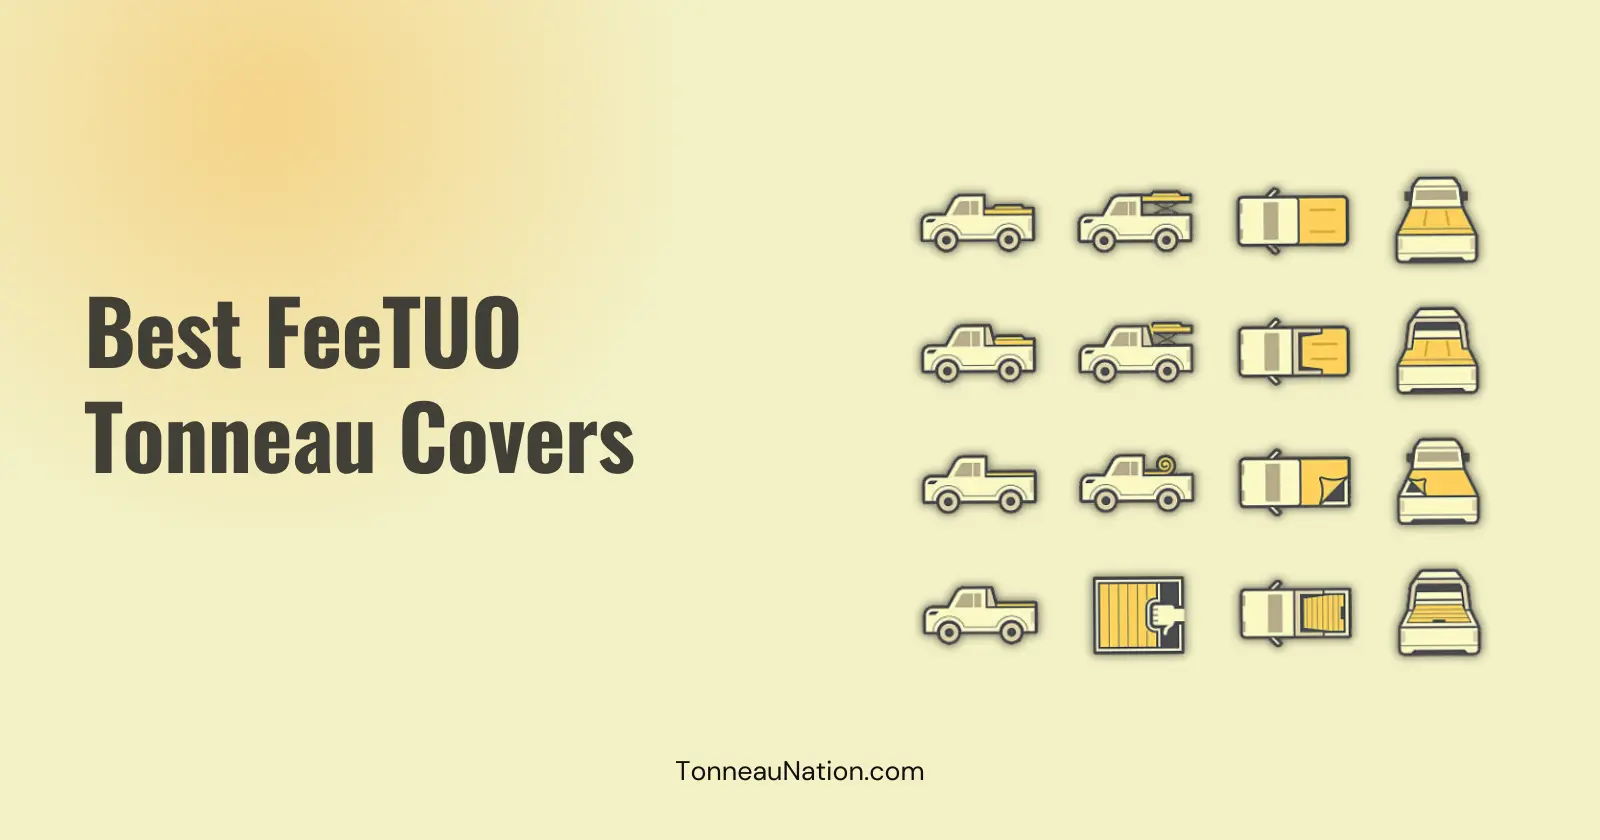 Tonneau cover from FeeTUO brand